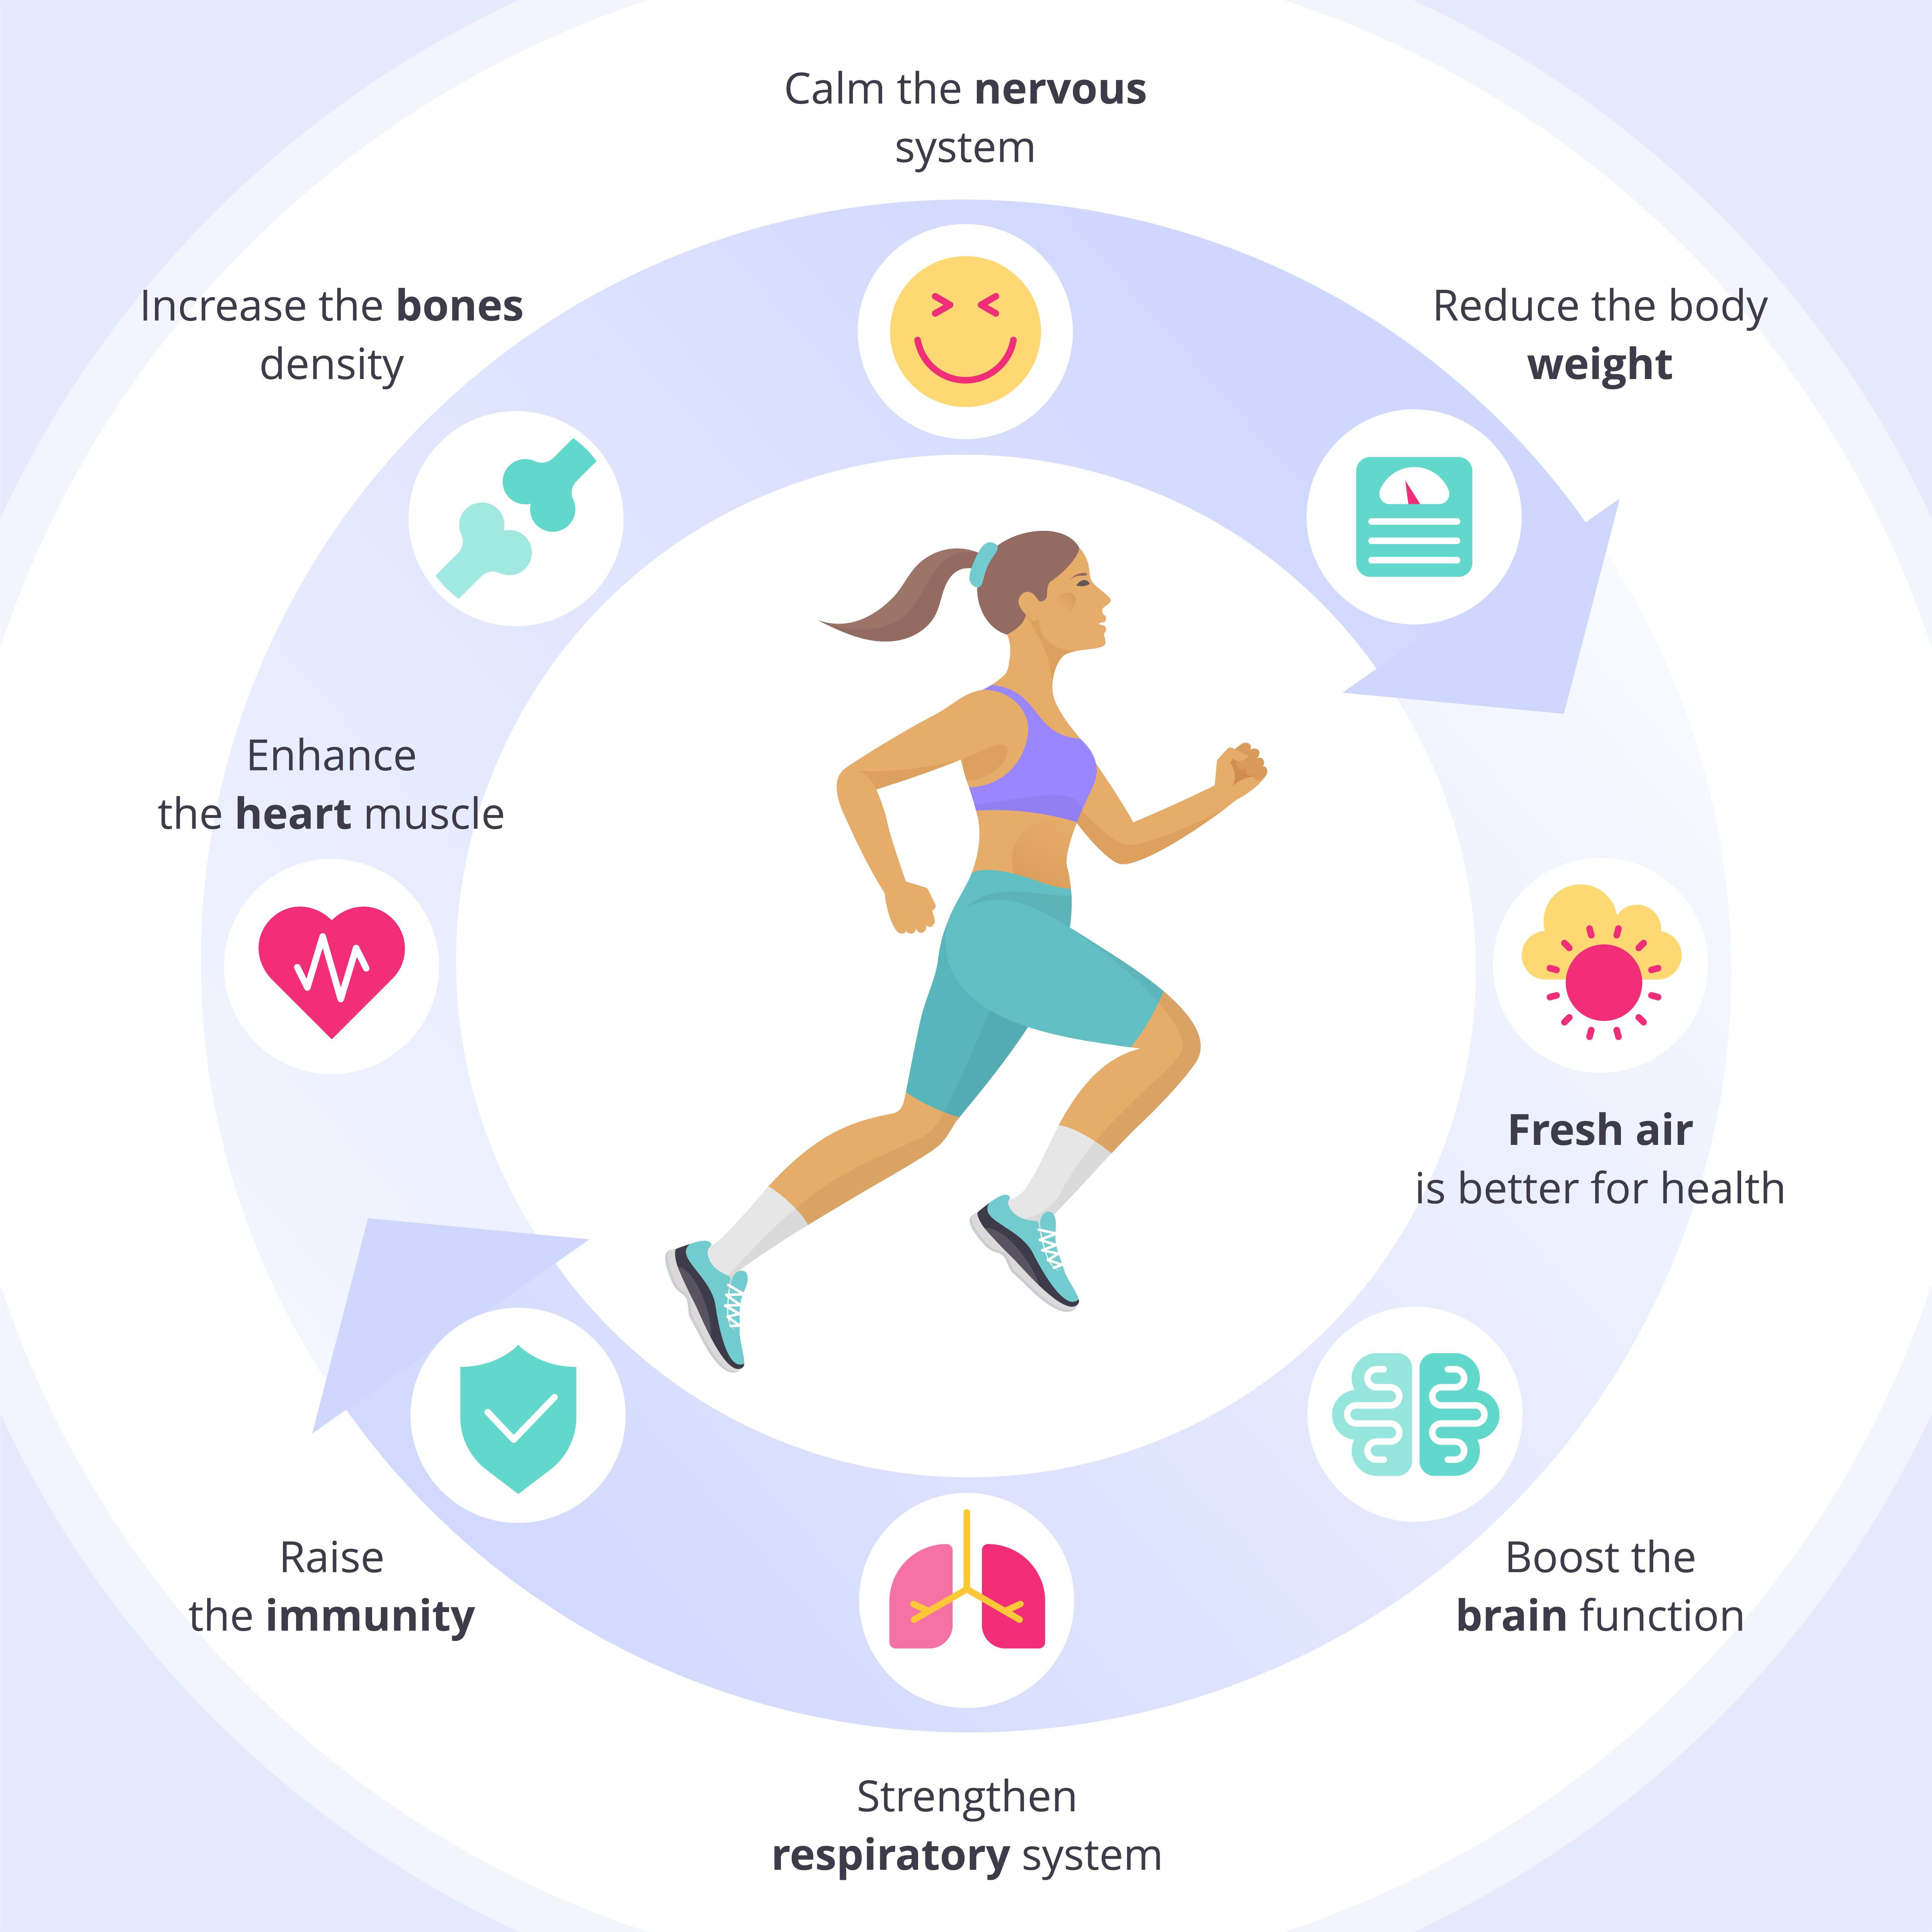 benefits of exercise